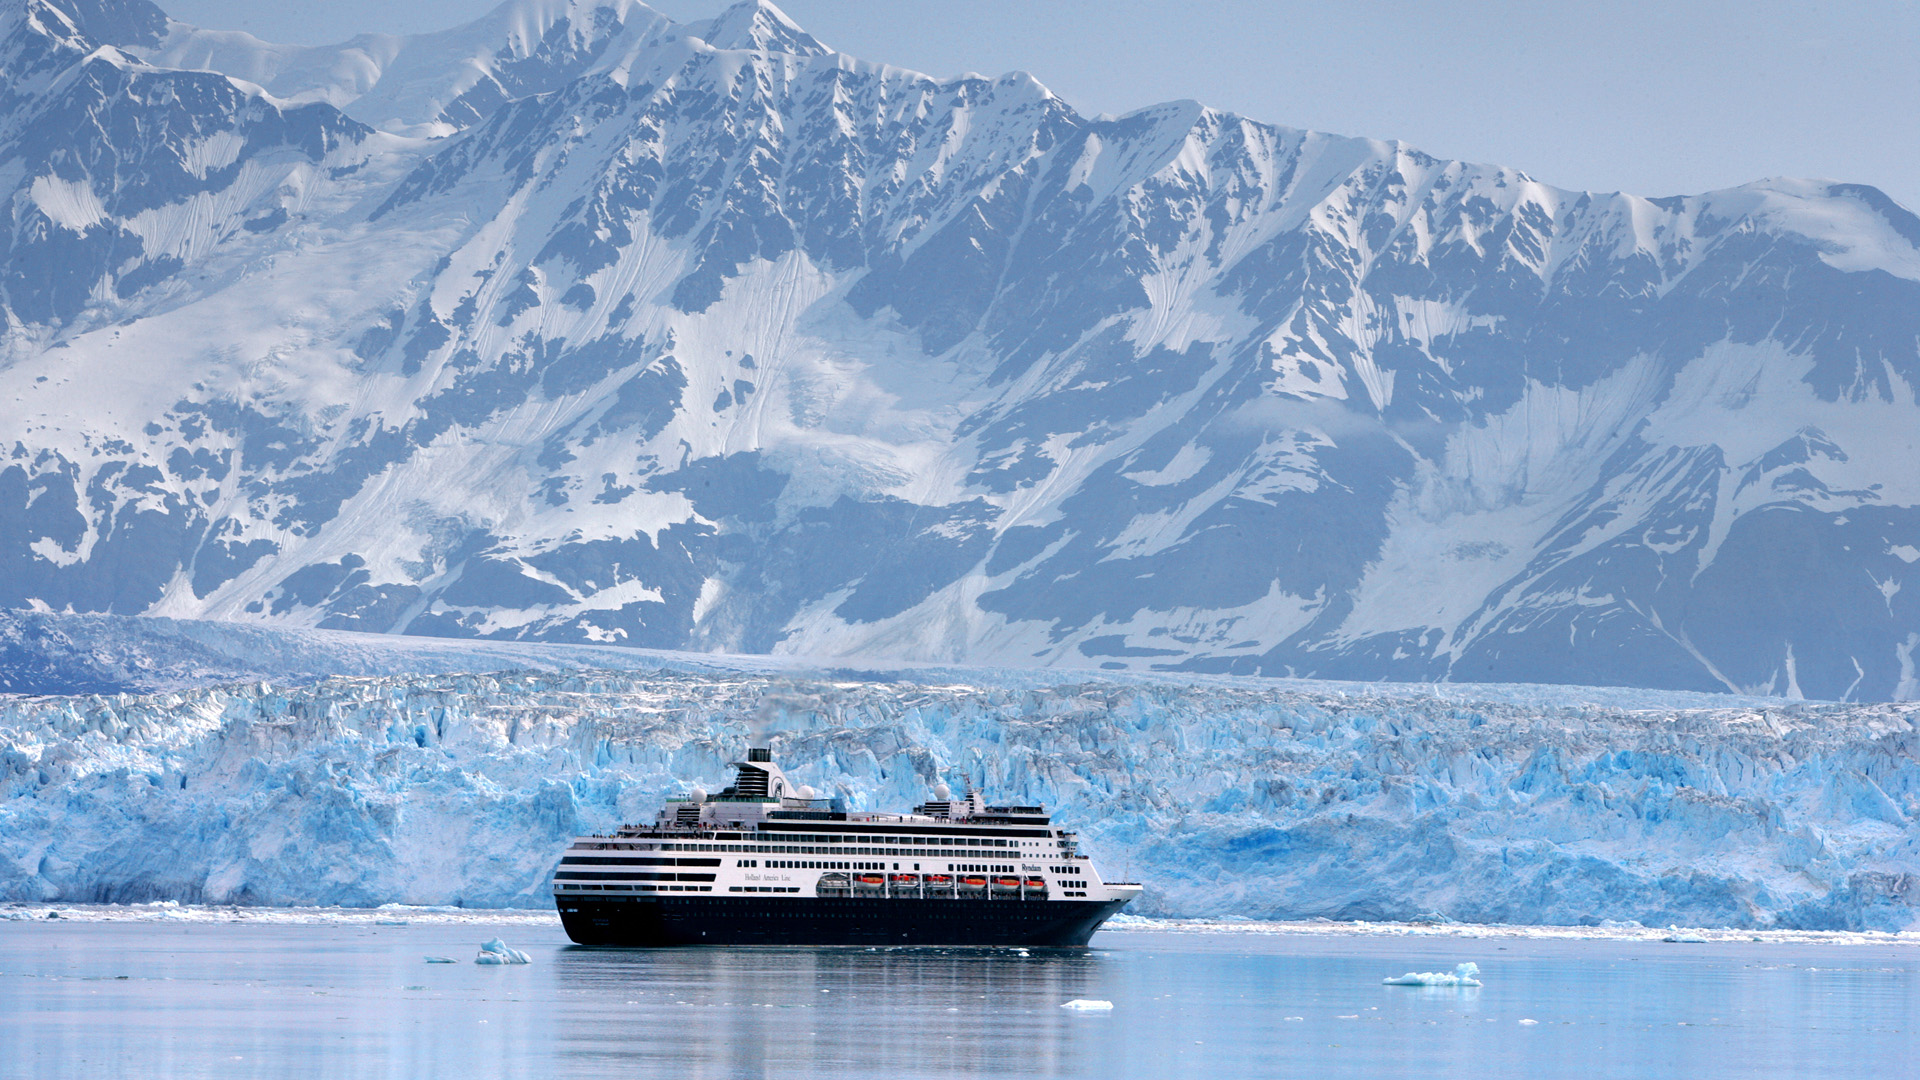 General 1920x1080 winter cruise ship mountains glacier Alaska nordic landscapes vehicle snow ice cold outdoors water ship